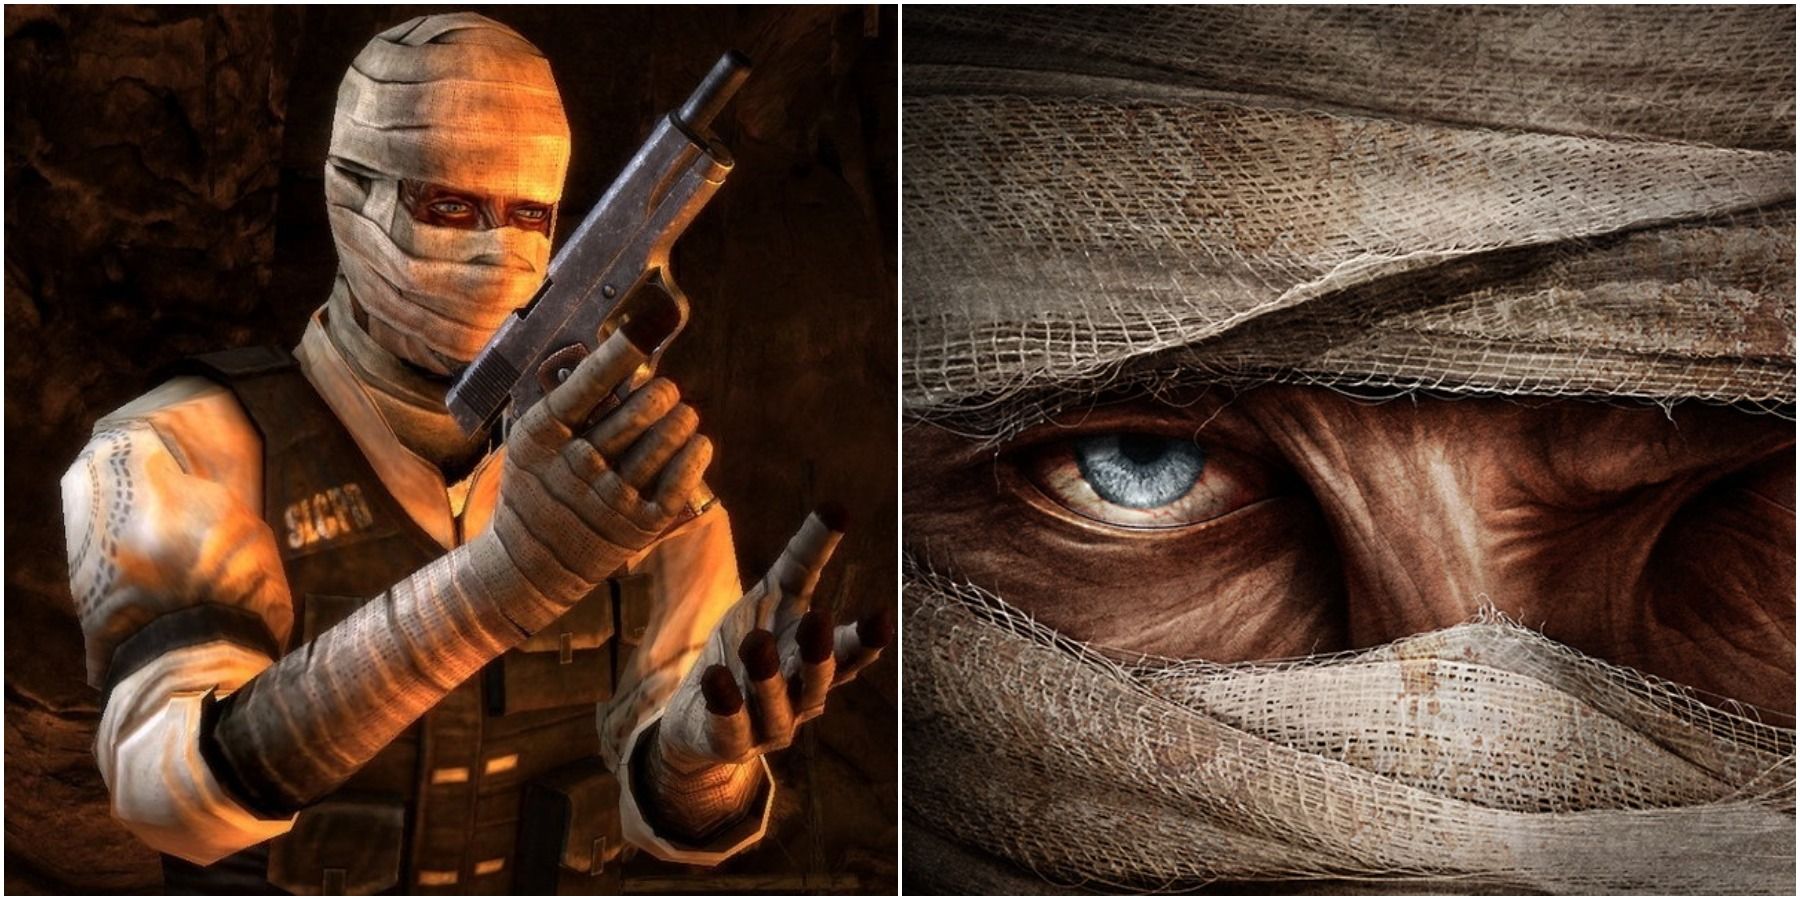 Split image of Joshua with gun and close up of his eye.